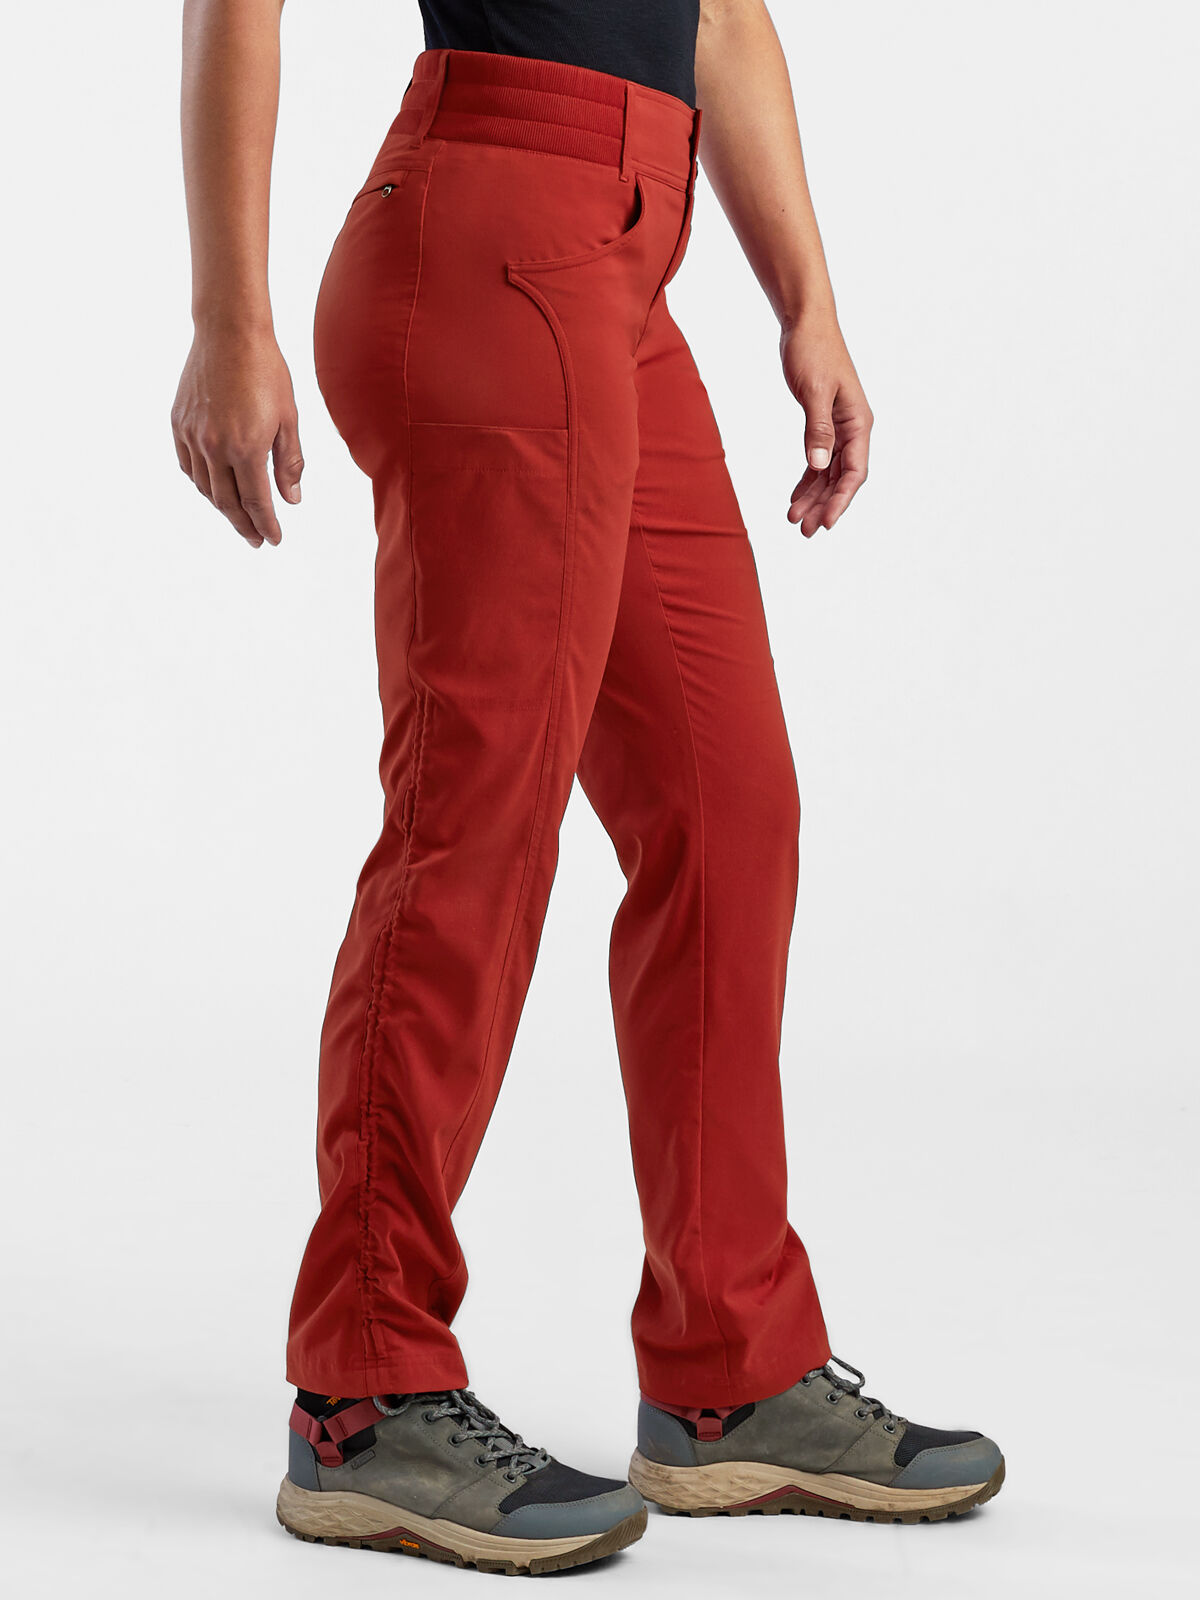 Hiking Pants Women: Recycled Clamber 30 inseam